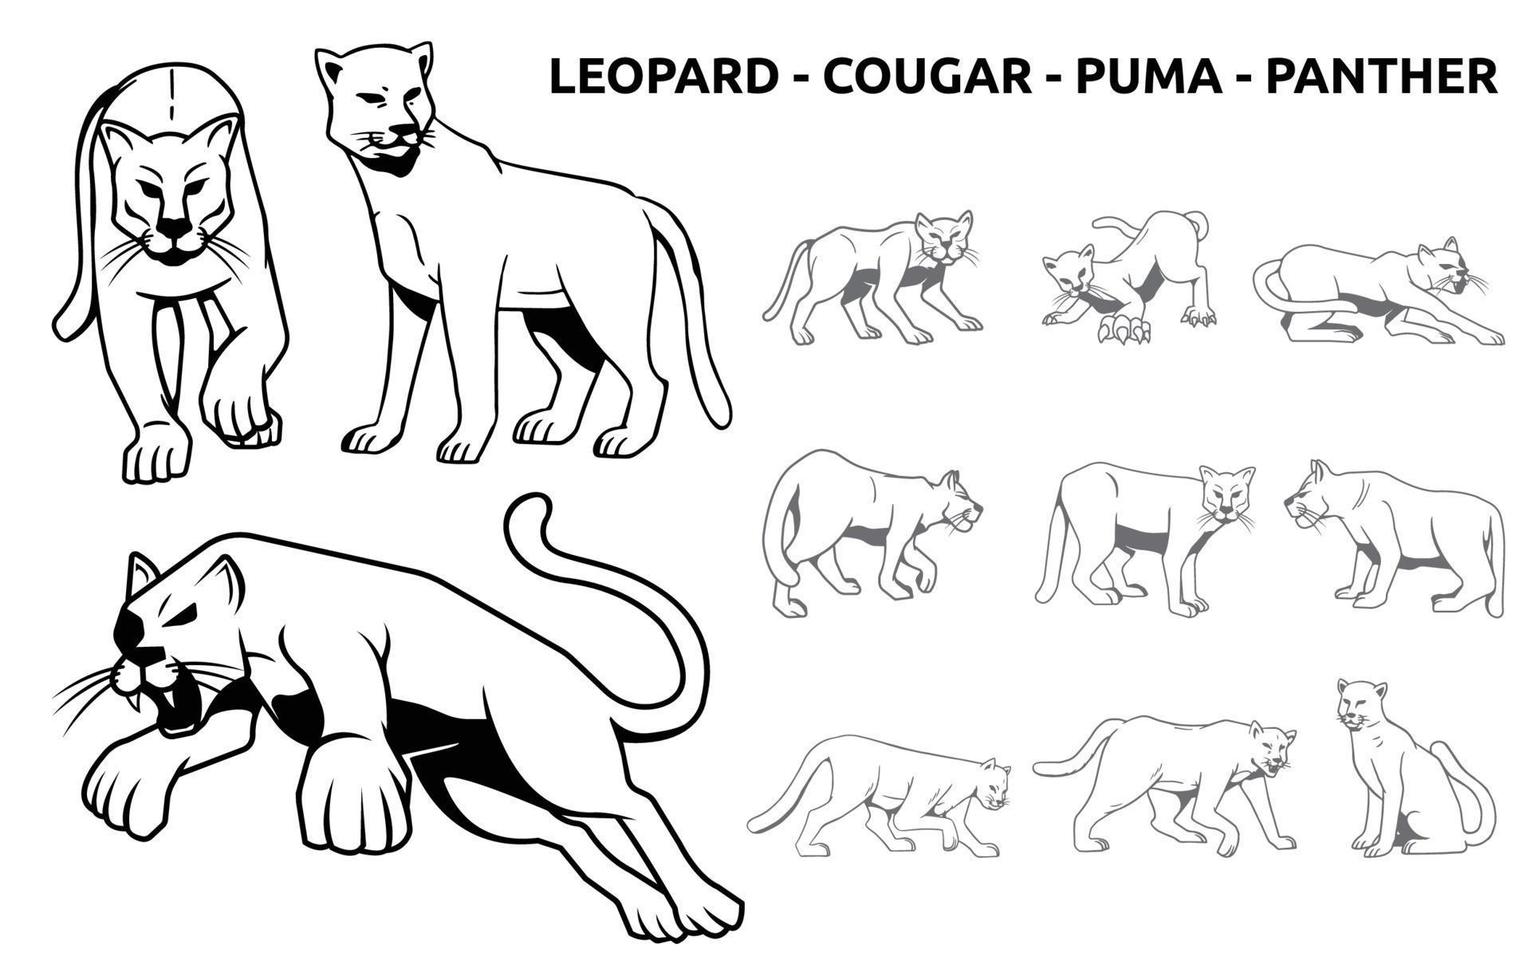 Leopard Cougar Puma Panther Big Cat Wildlife Animal Silhouette vector